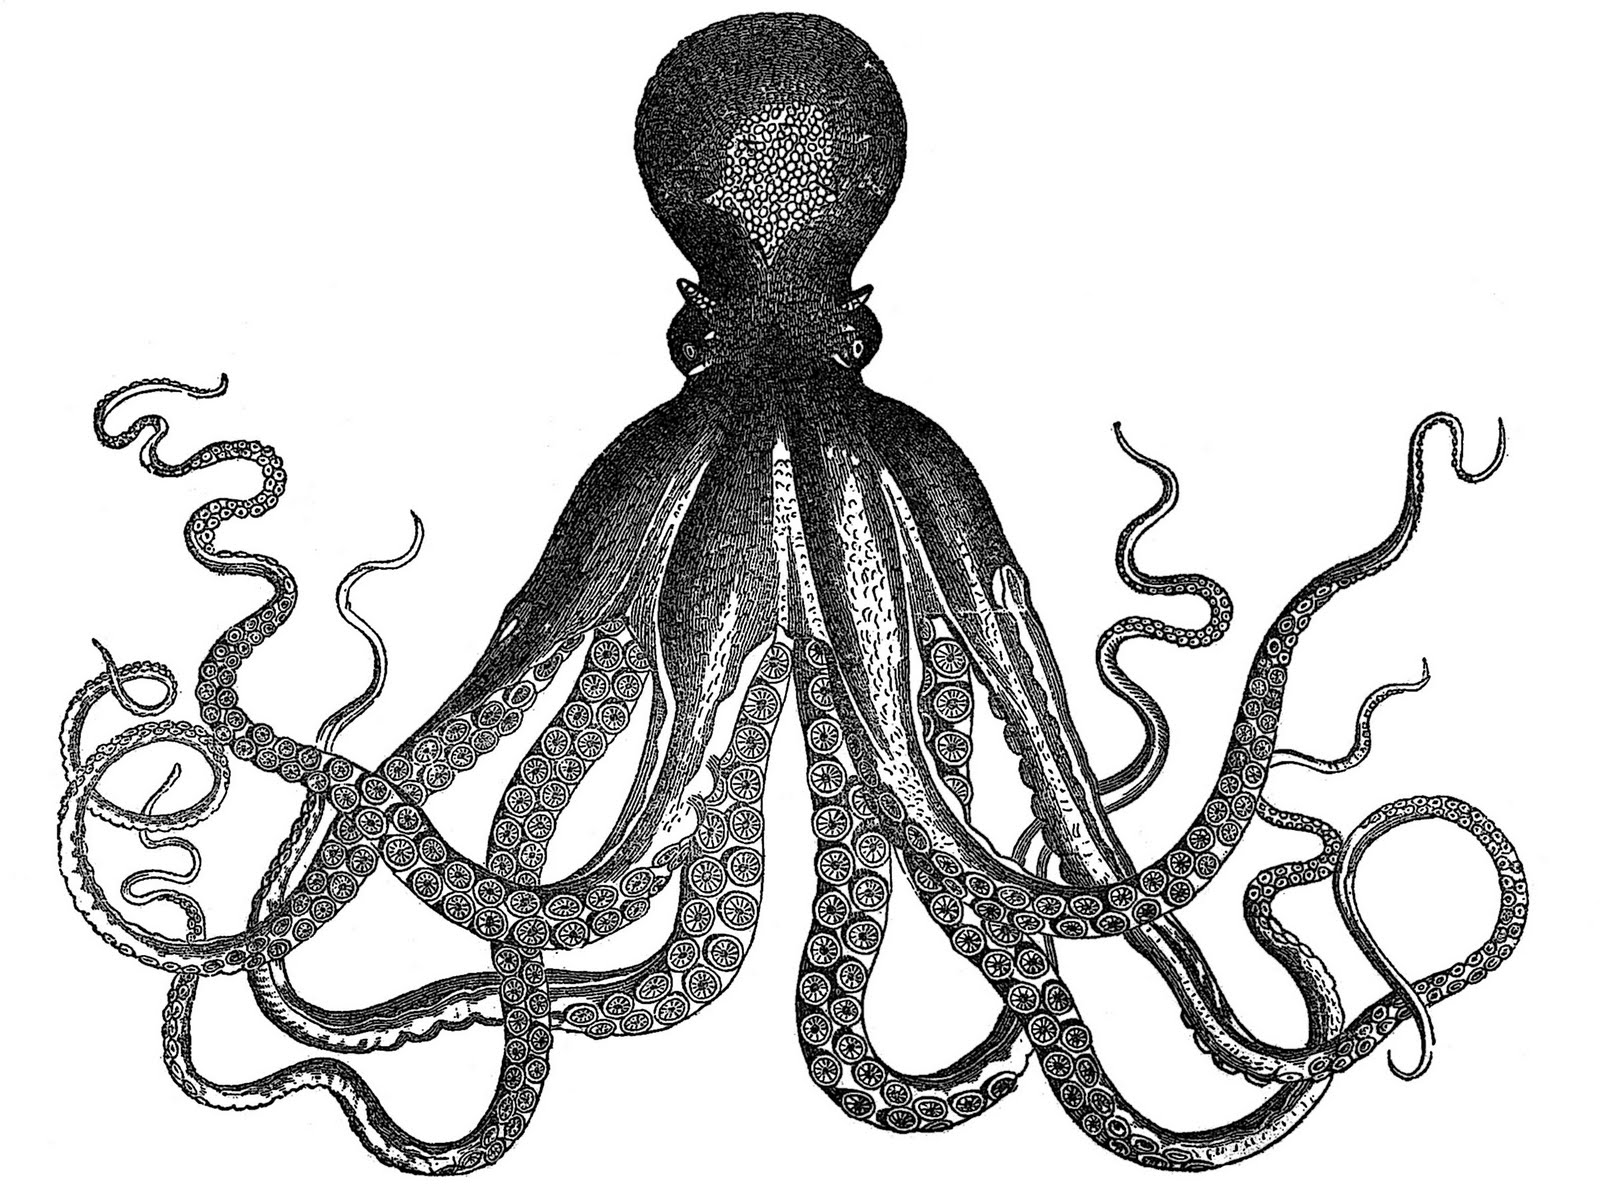 http://imgkid.com/octopus-drawing-black-and-white.shtml